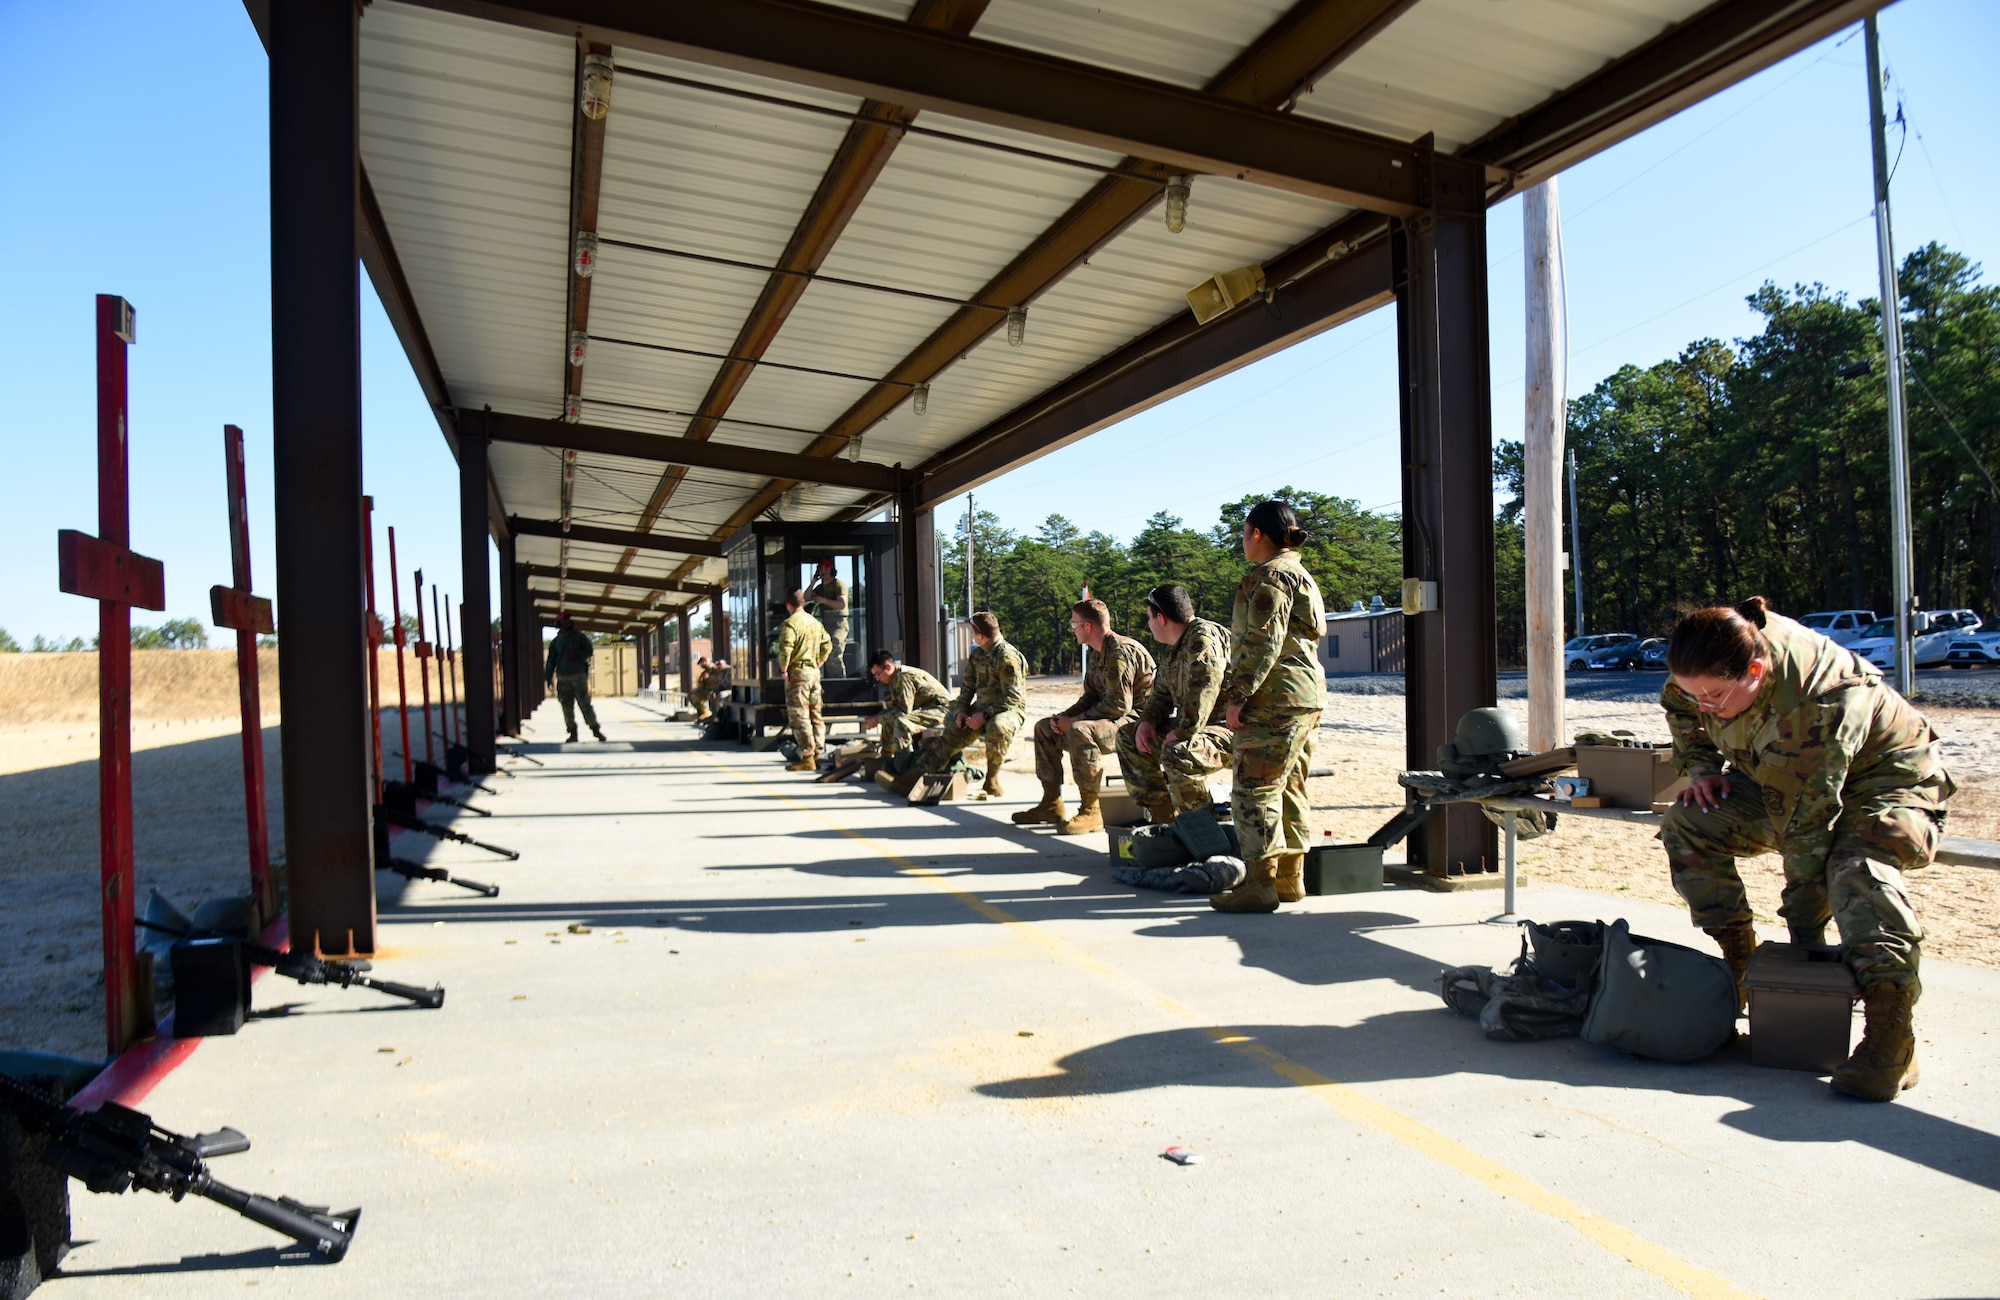 Participants prepare for the M4 rifle qualification course at the U.S. Army Support Activity training range, Nov. 6, 2020, on Joint Base McGuire-Dix-Lakehurst, N.J. This qualification course will prepare Airmen for deployment operations in the future. (U.S. Air Force photo by Daniel Barney)